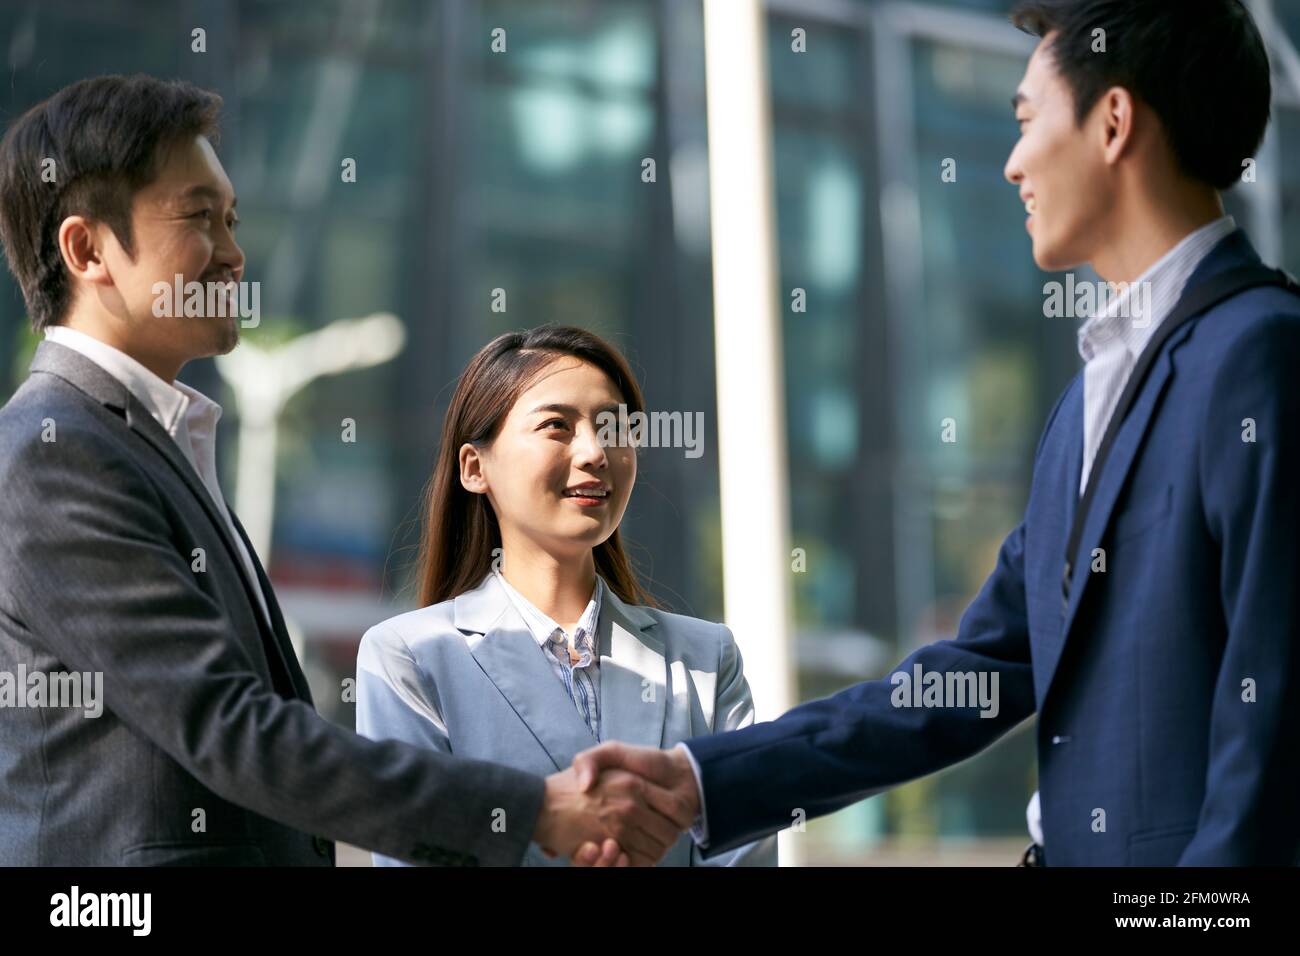 asian business associates meeting in the street in downtown financial district shaking hands Stock Photo